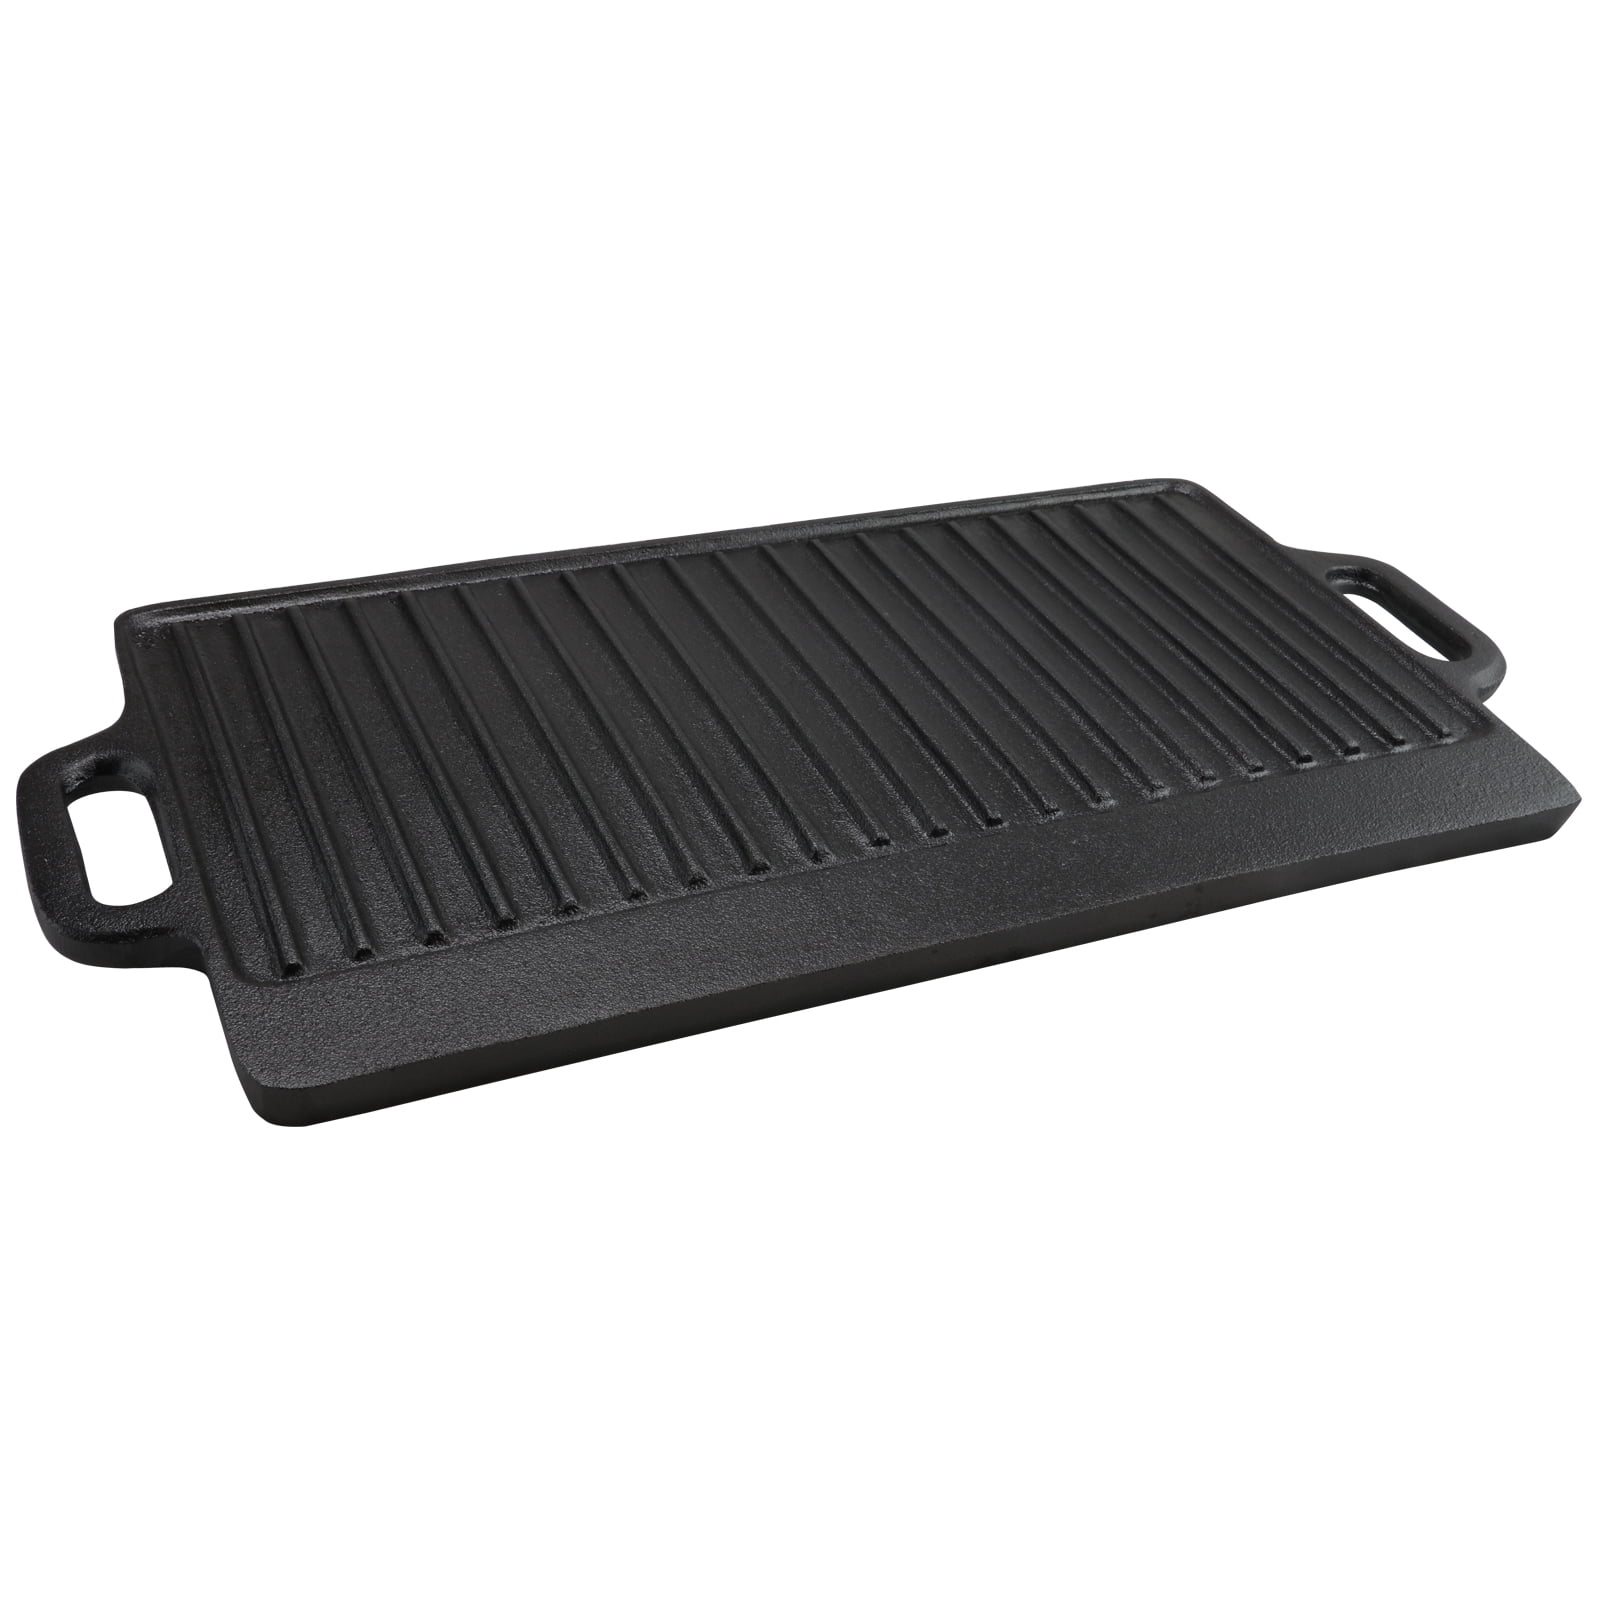 You 10000000% Need a Cast-Iron Griddle